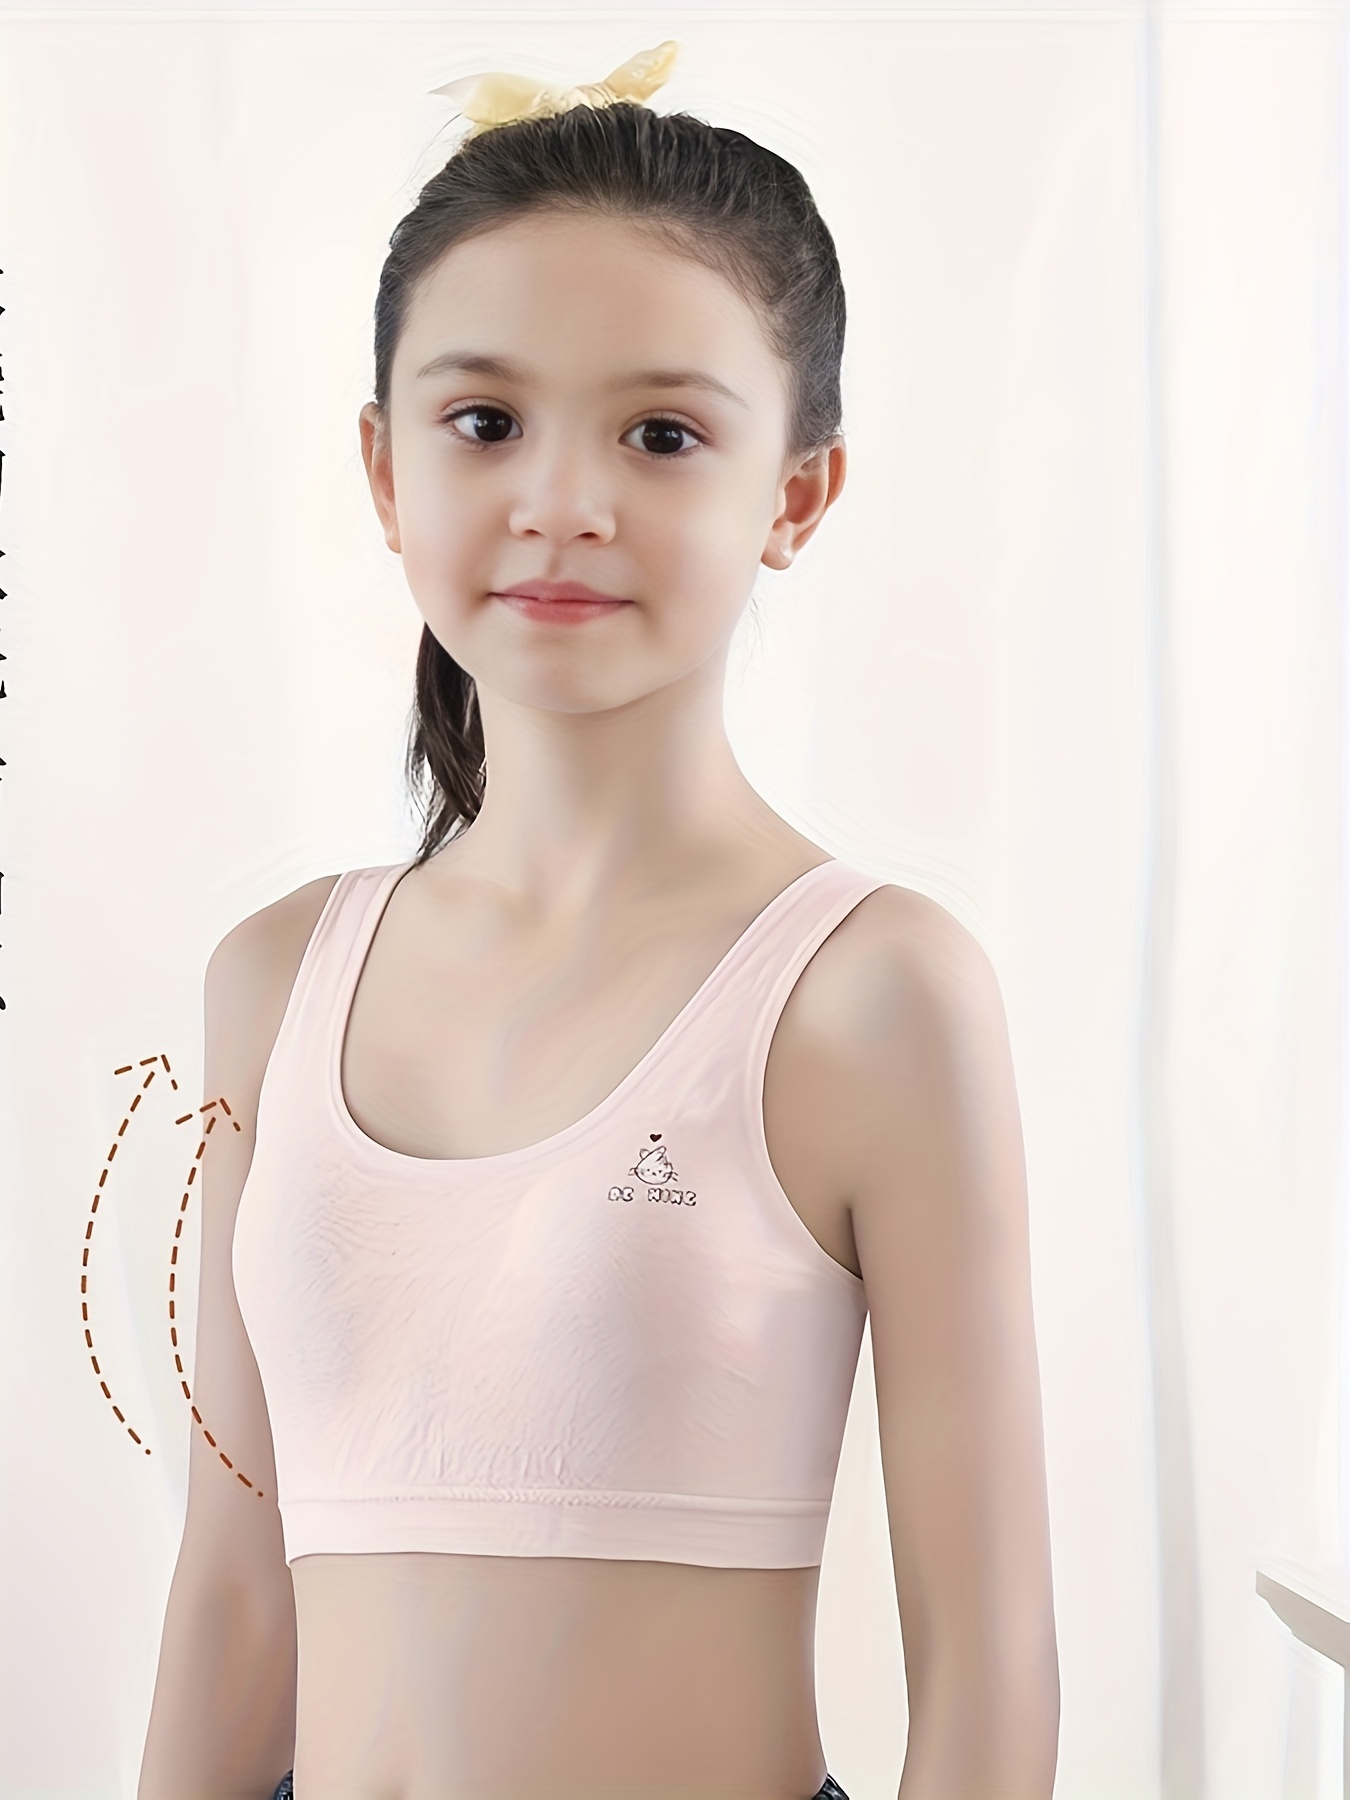 One-size Teen Girls Sports Bra, High Stretch Breathable Soft Comfortable  Sports Vest Underwear For 9-15 Years Old